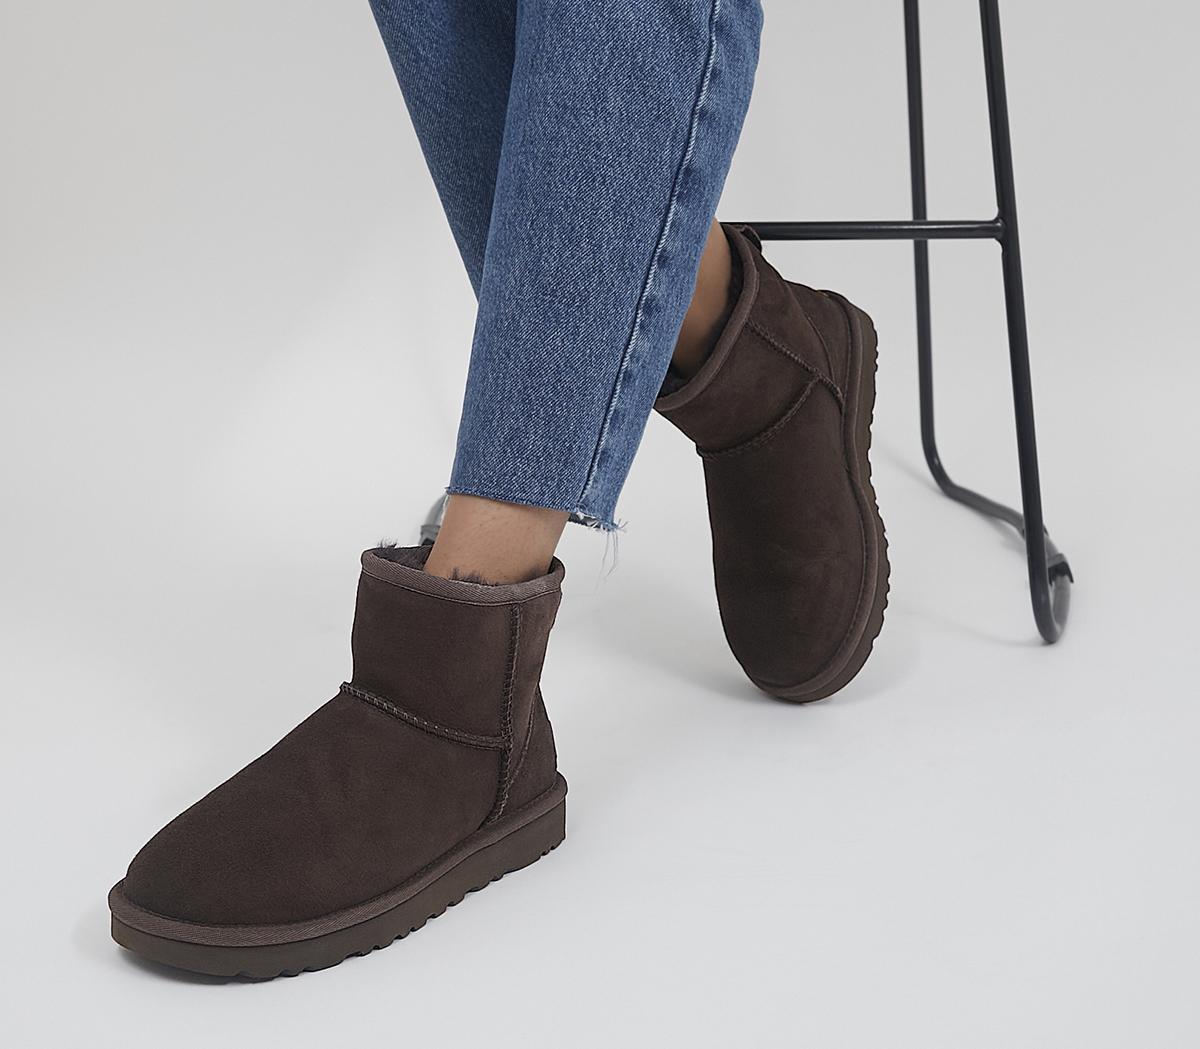 UGG Classic Mini II Boots Chocolate Suede - Women's Ankle Boots